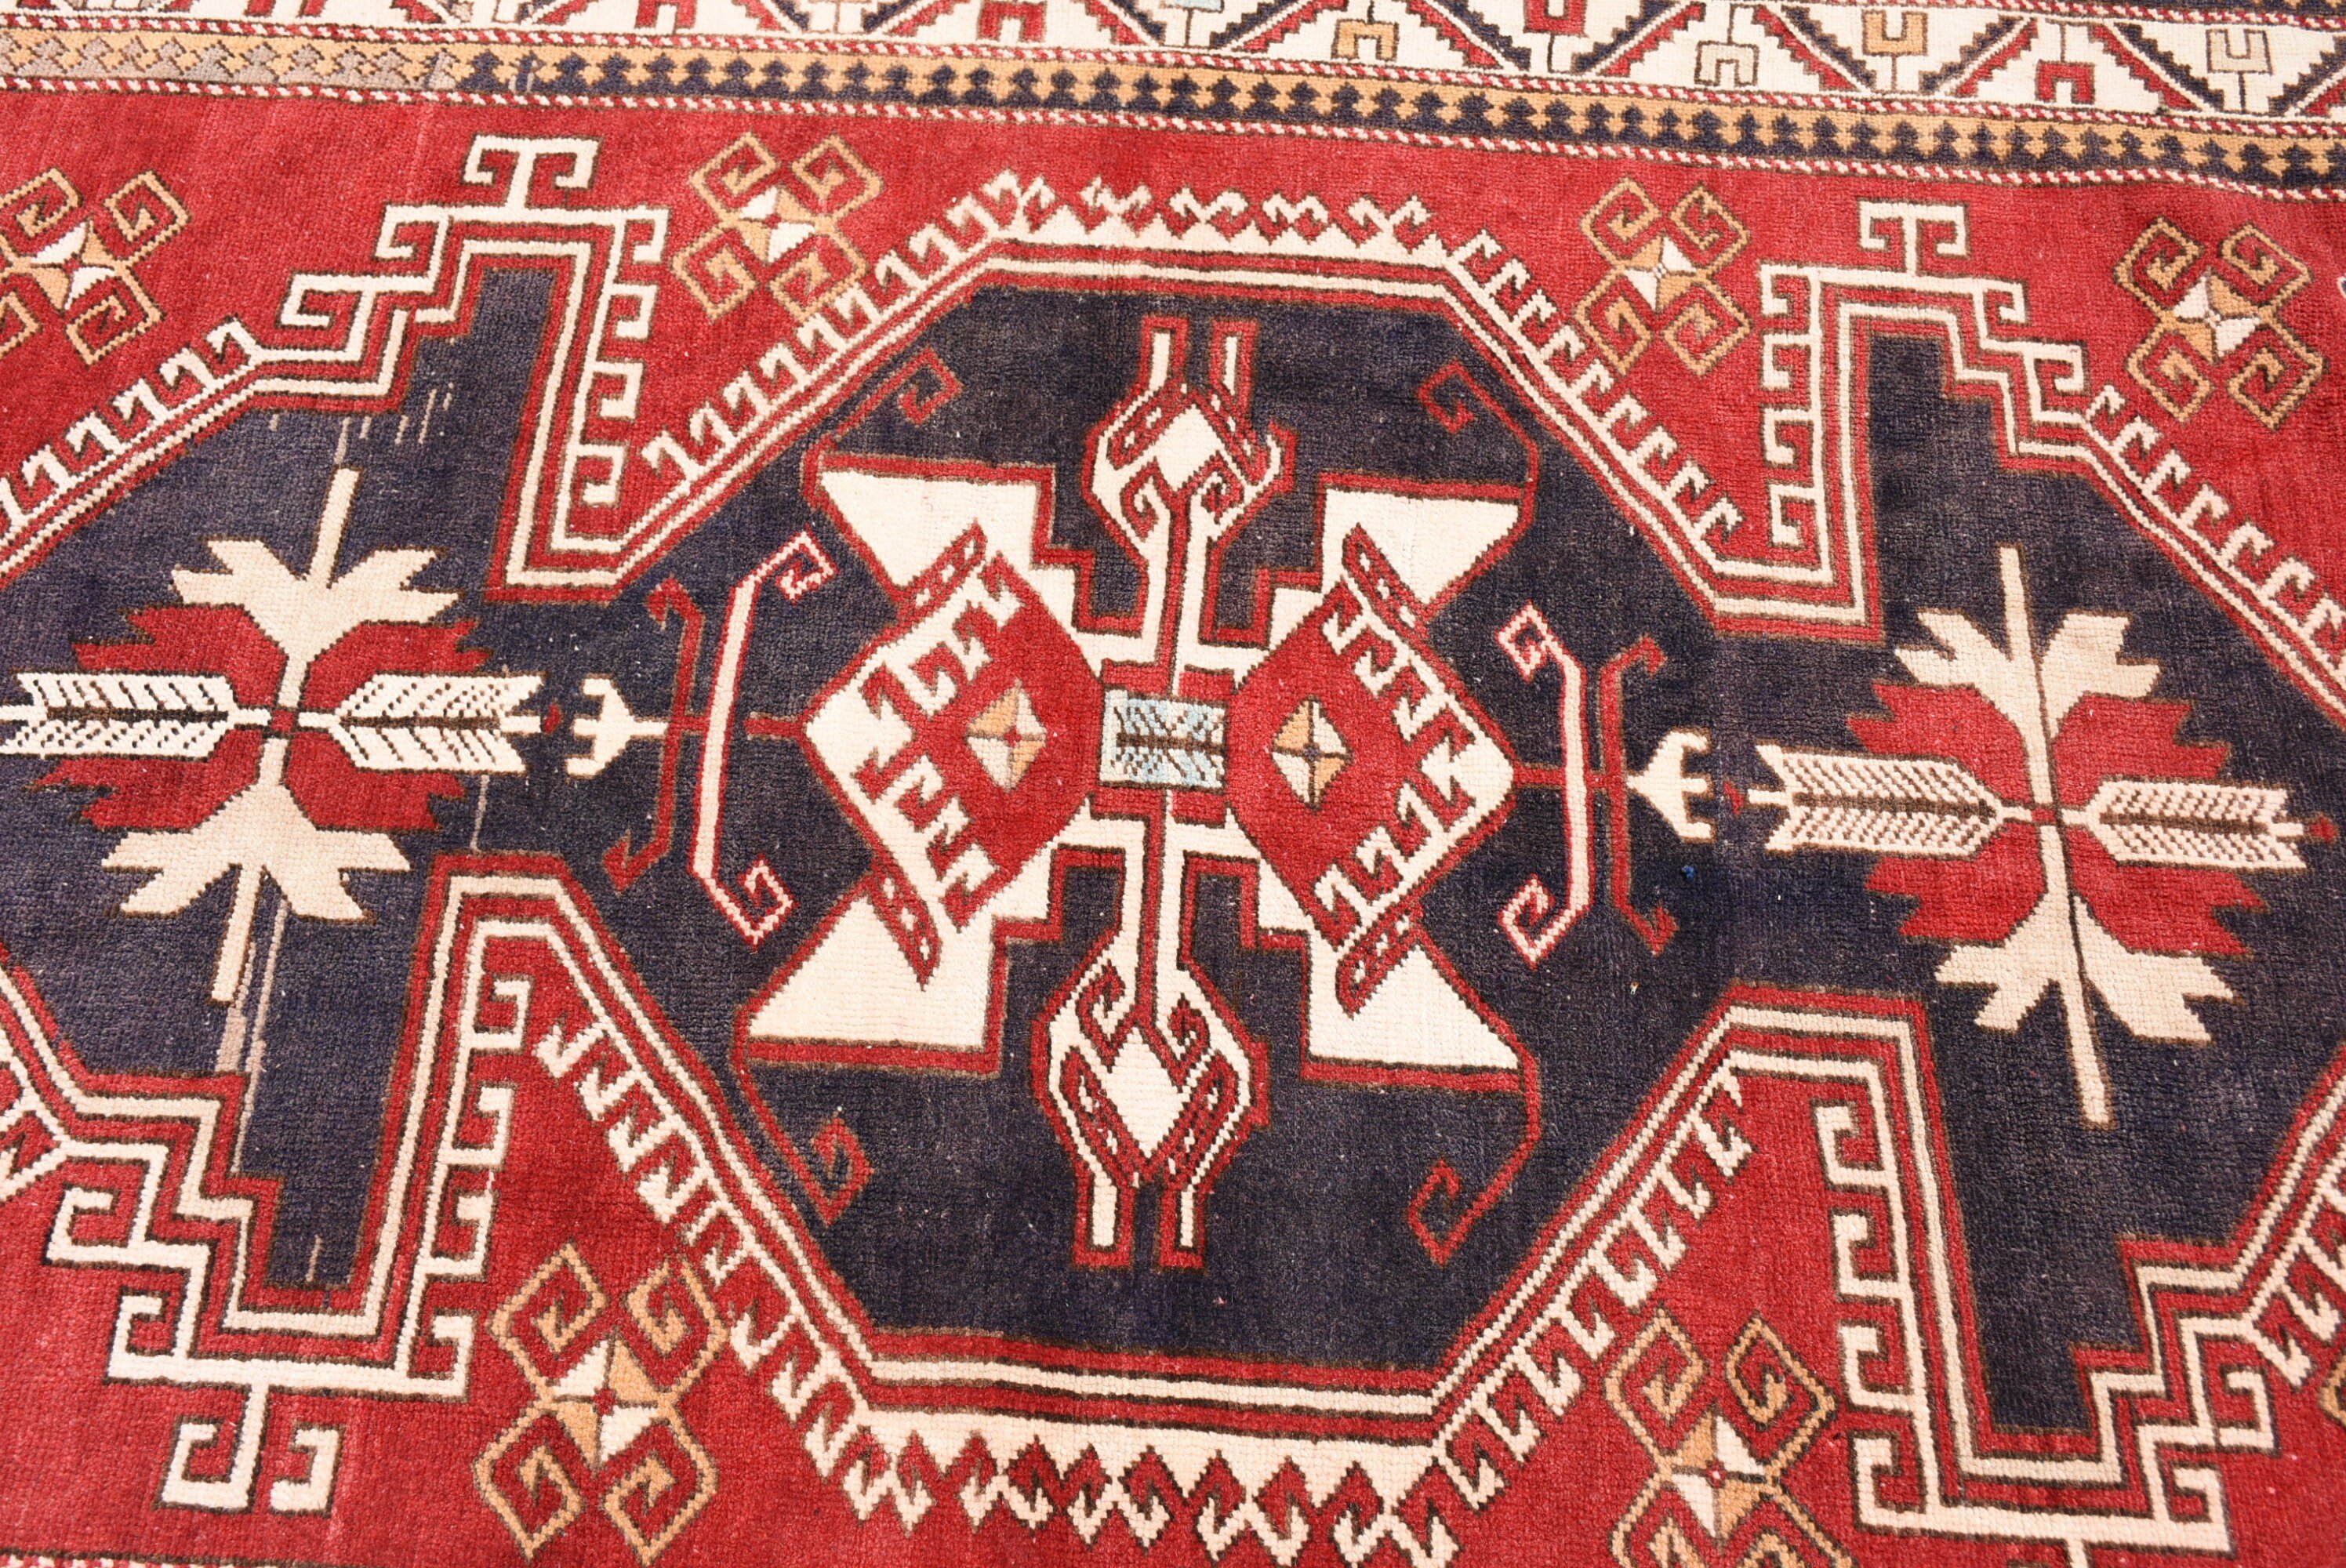 Turkish Rug, Eclectic Rugs, Vintage Rug, Moroccan Rugs, 4.4x6.6 ft Area Rug, Dining Room Rugs, Red Cool Rugs, Rugs for Bedroom, Kitchen Rug